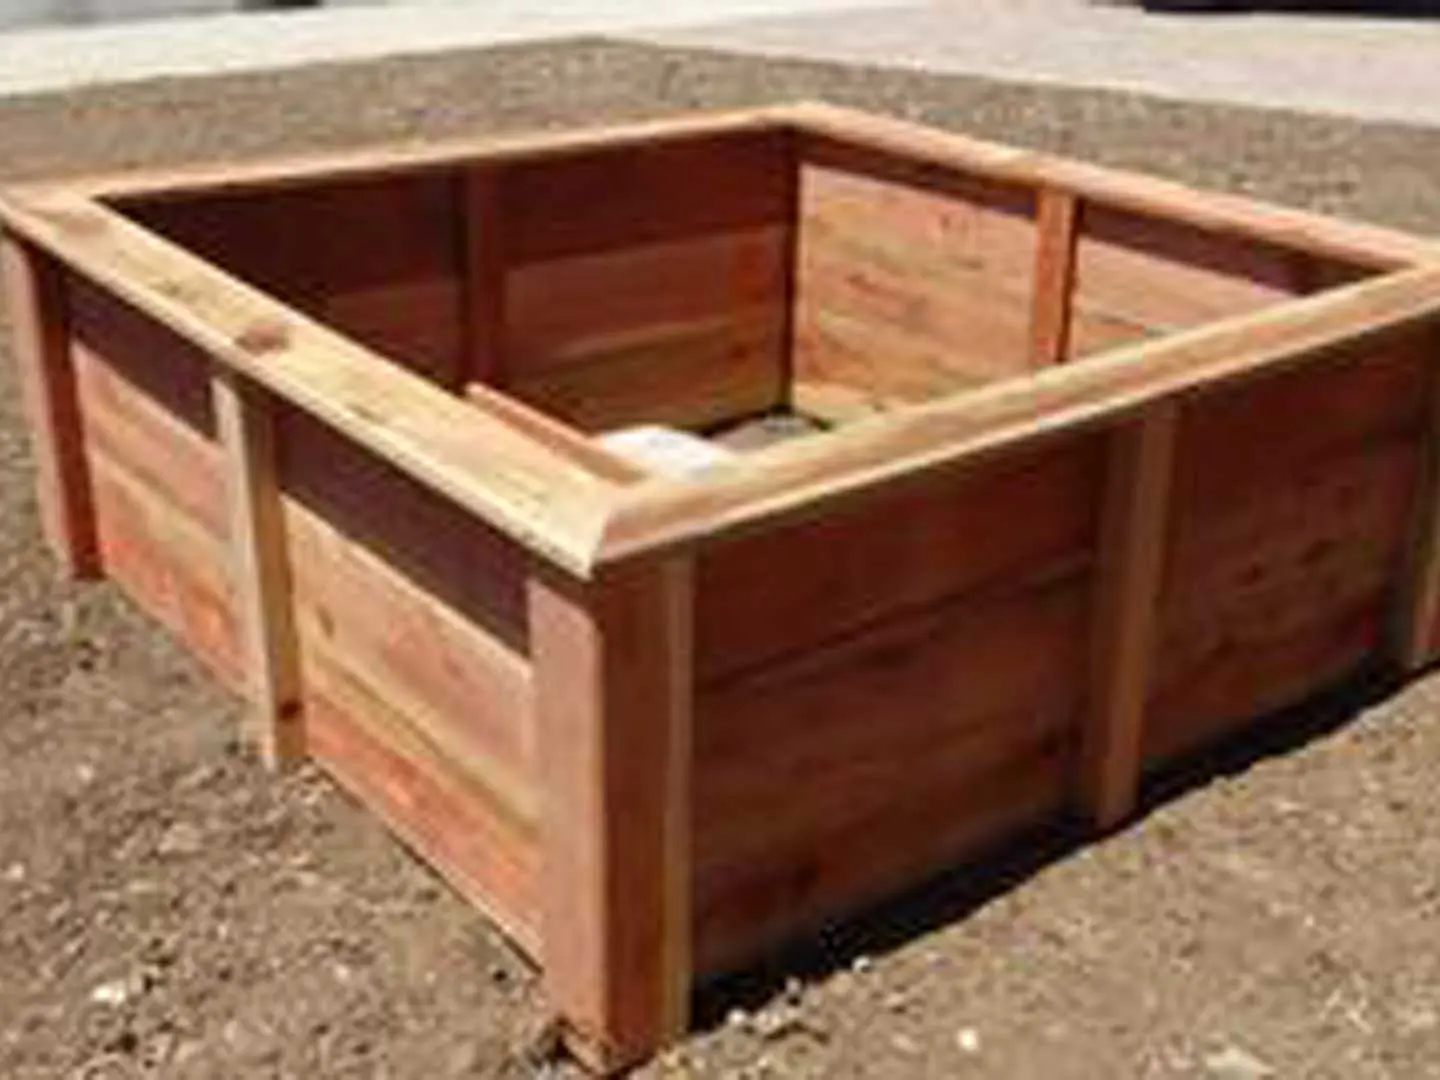 A wooden raised garden bed in the dirt.